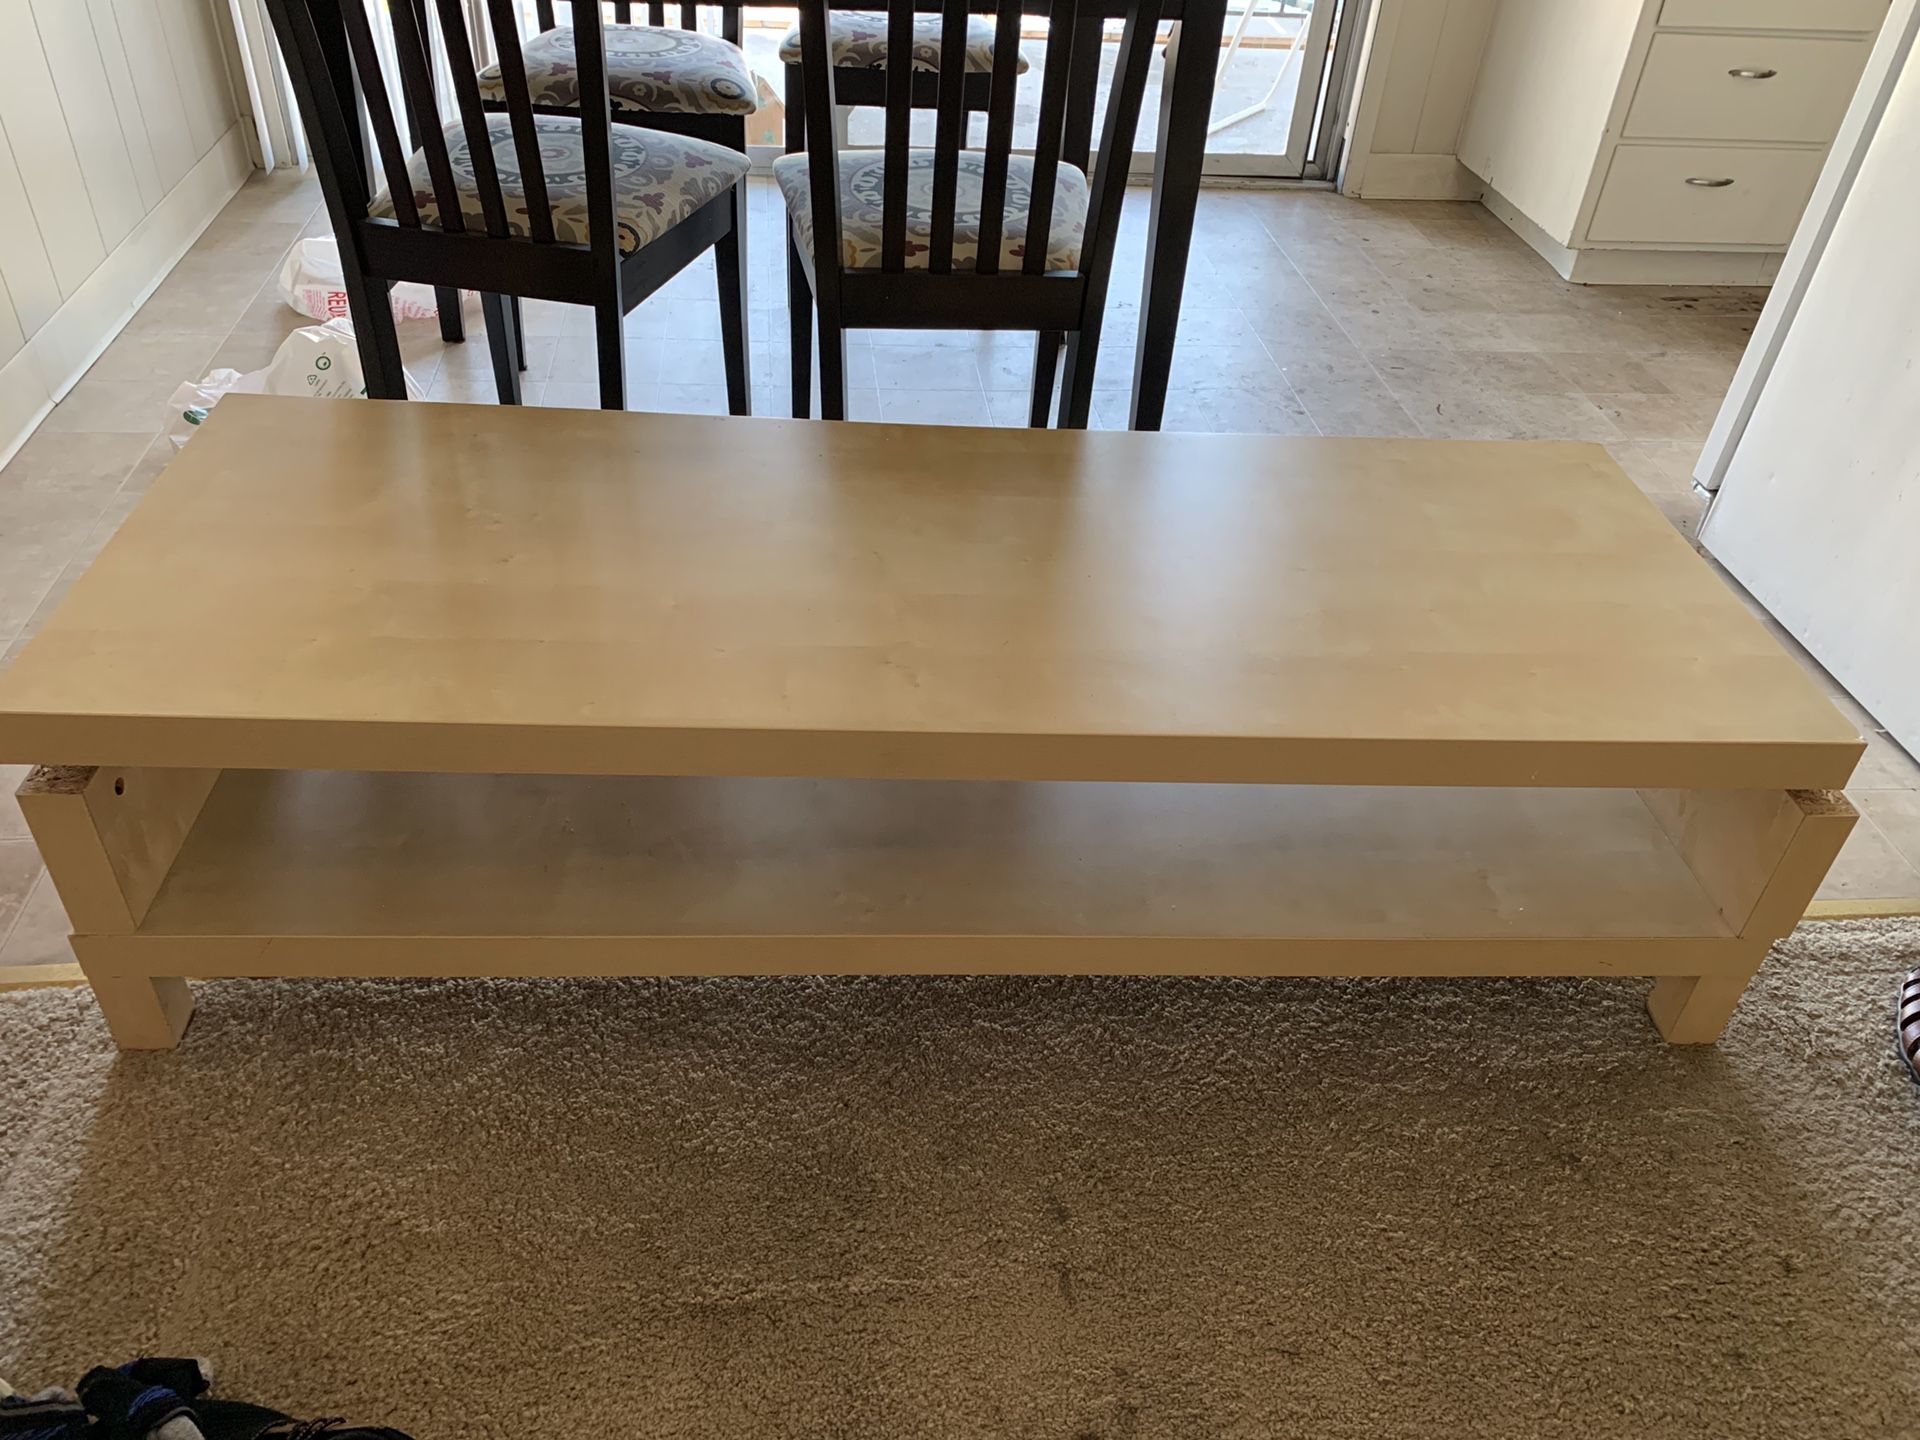 Tv stand or table (need to assemble)